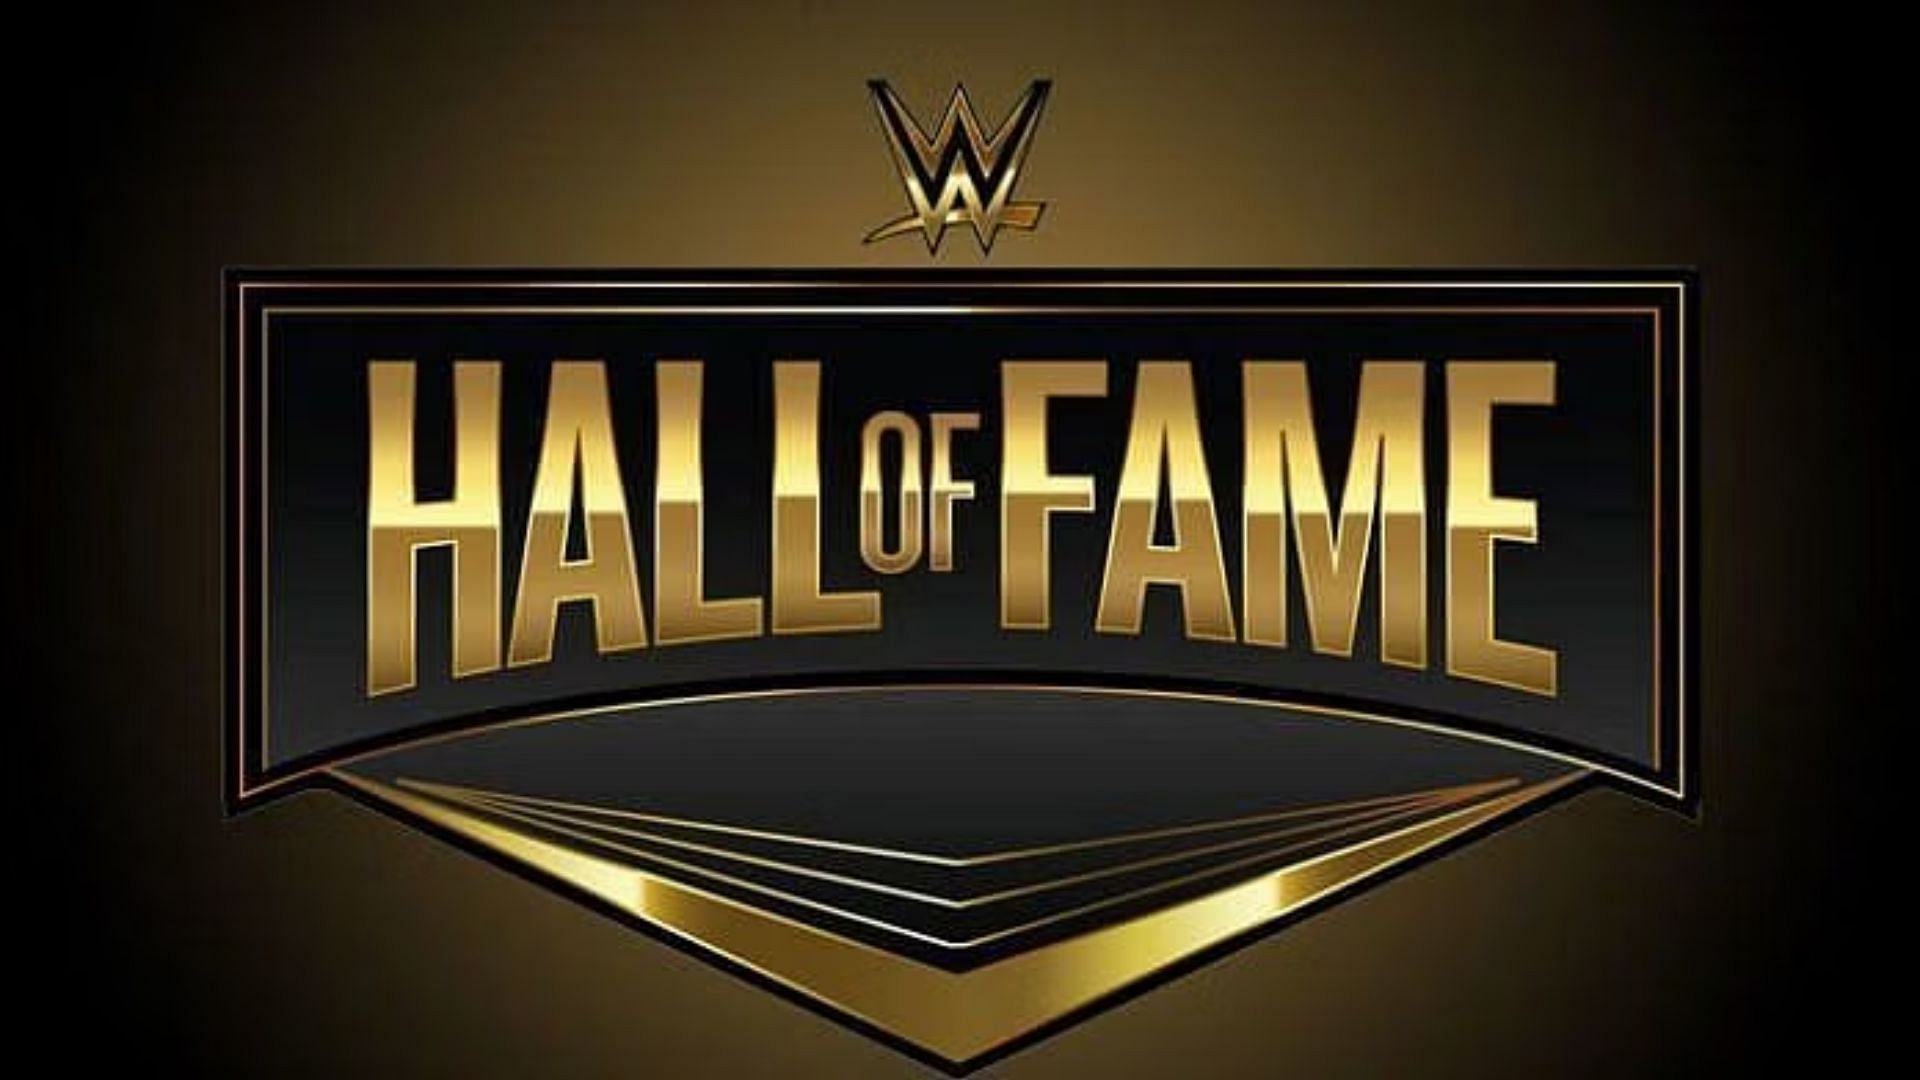 WWE Hall of Famer recently shared an image updating his health condition